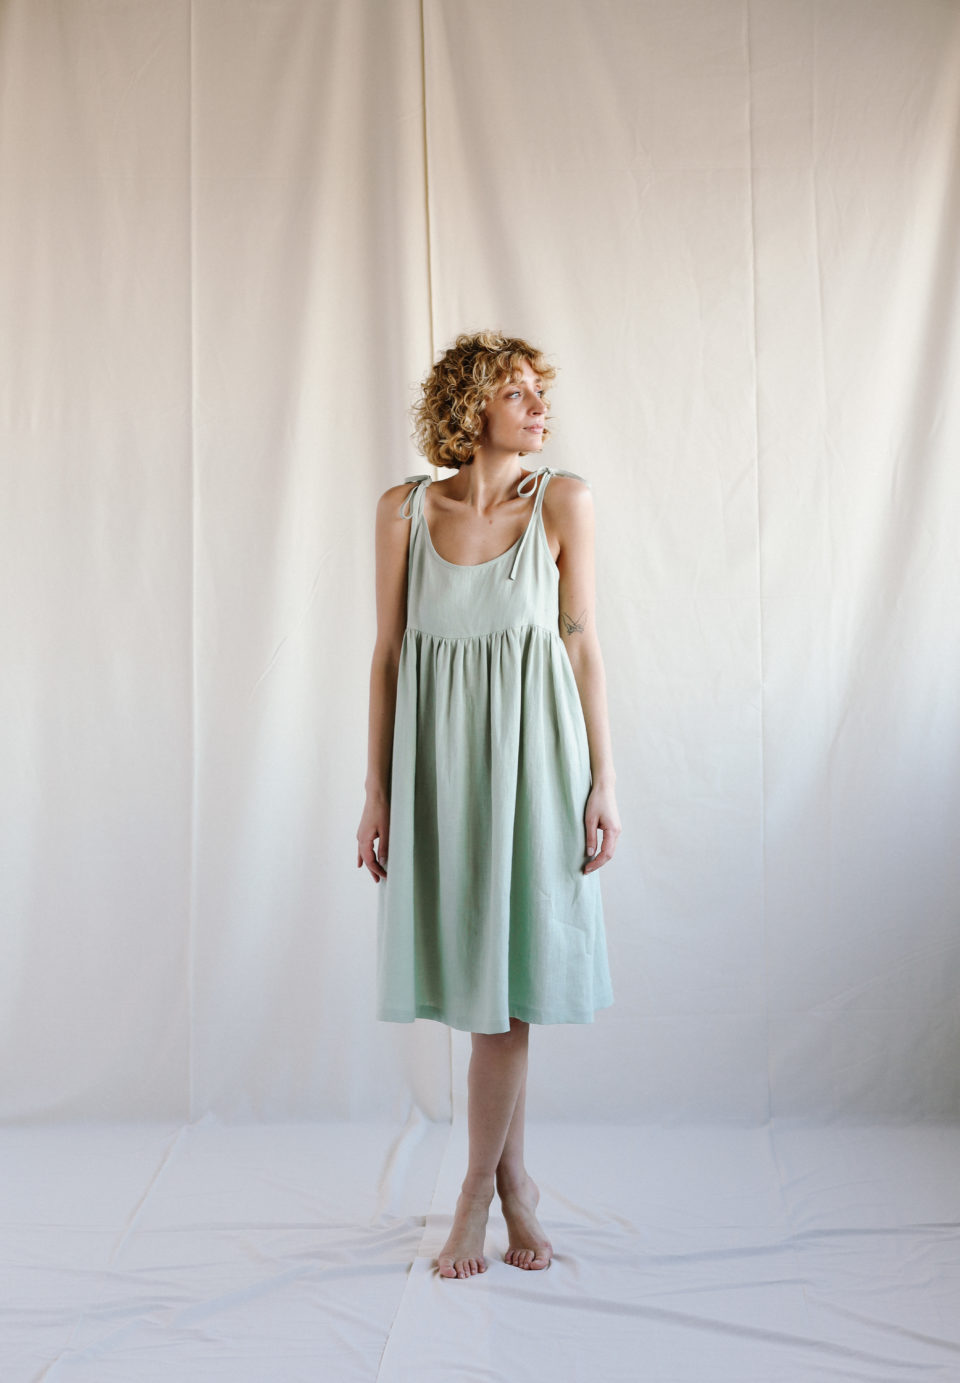 Loose linen dress in sage green color | Dress | Sustainable clothing | OffOn clothing